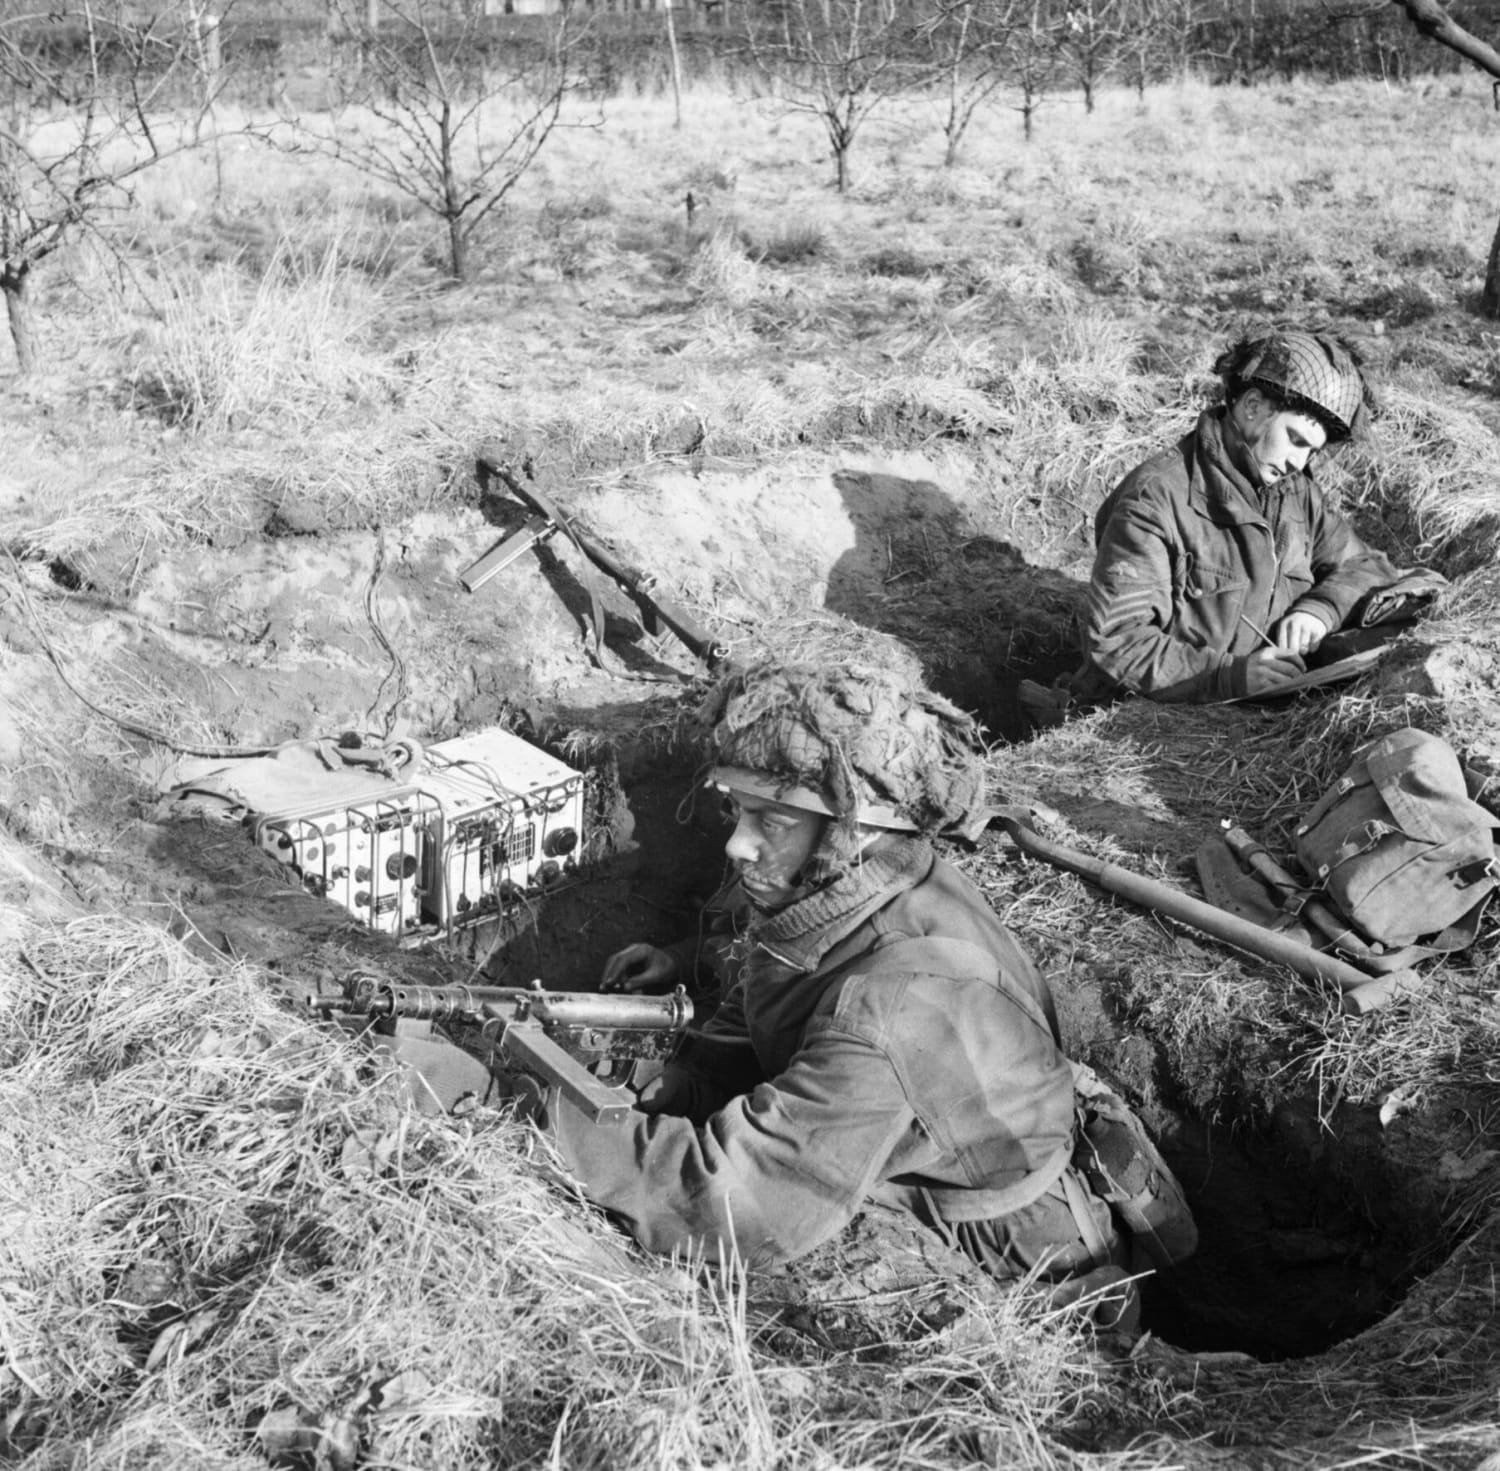 "Airborne troops man a trench with a No. 76 wireless set, Heldon in Holland, 3 February 1945."